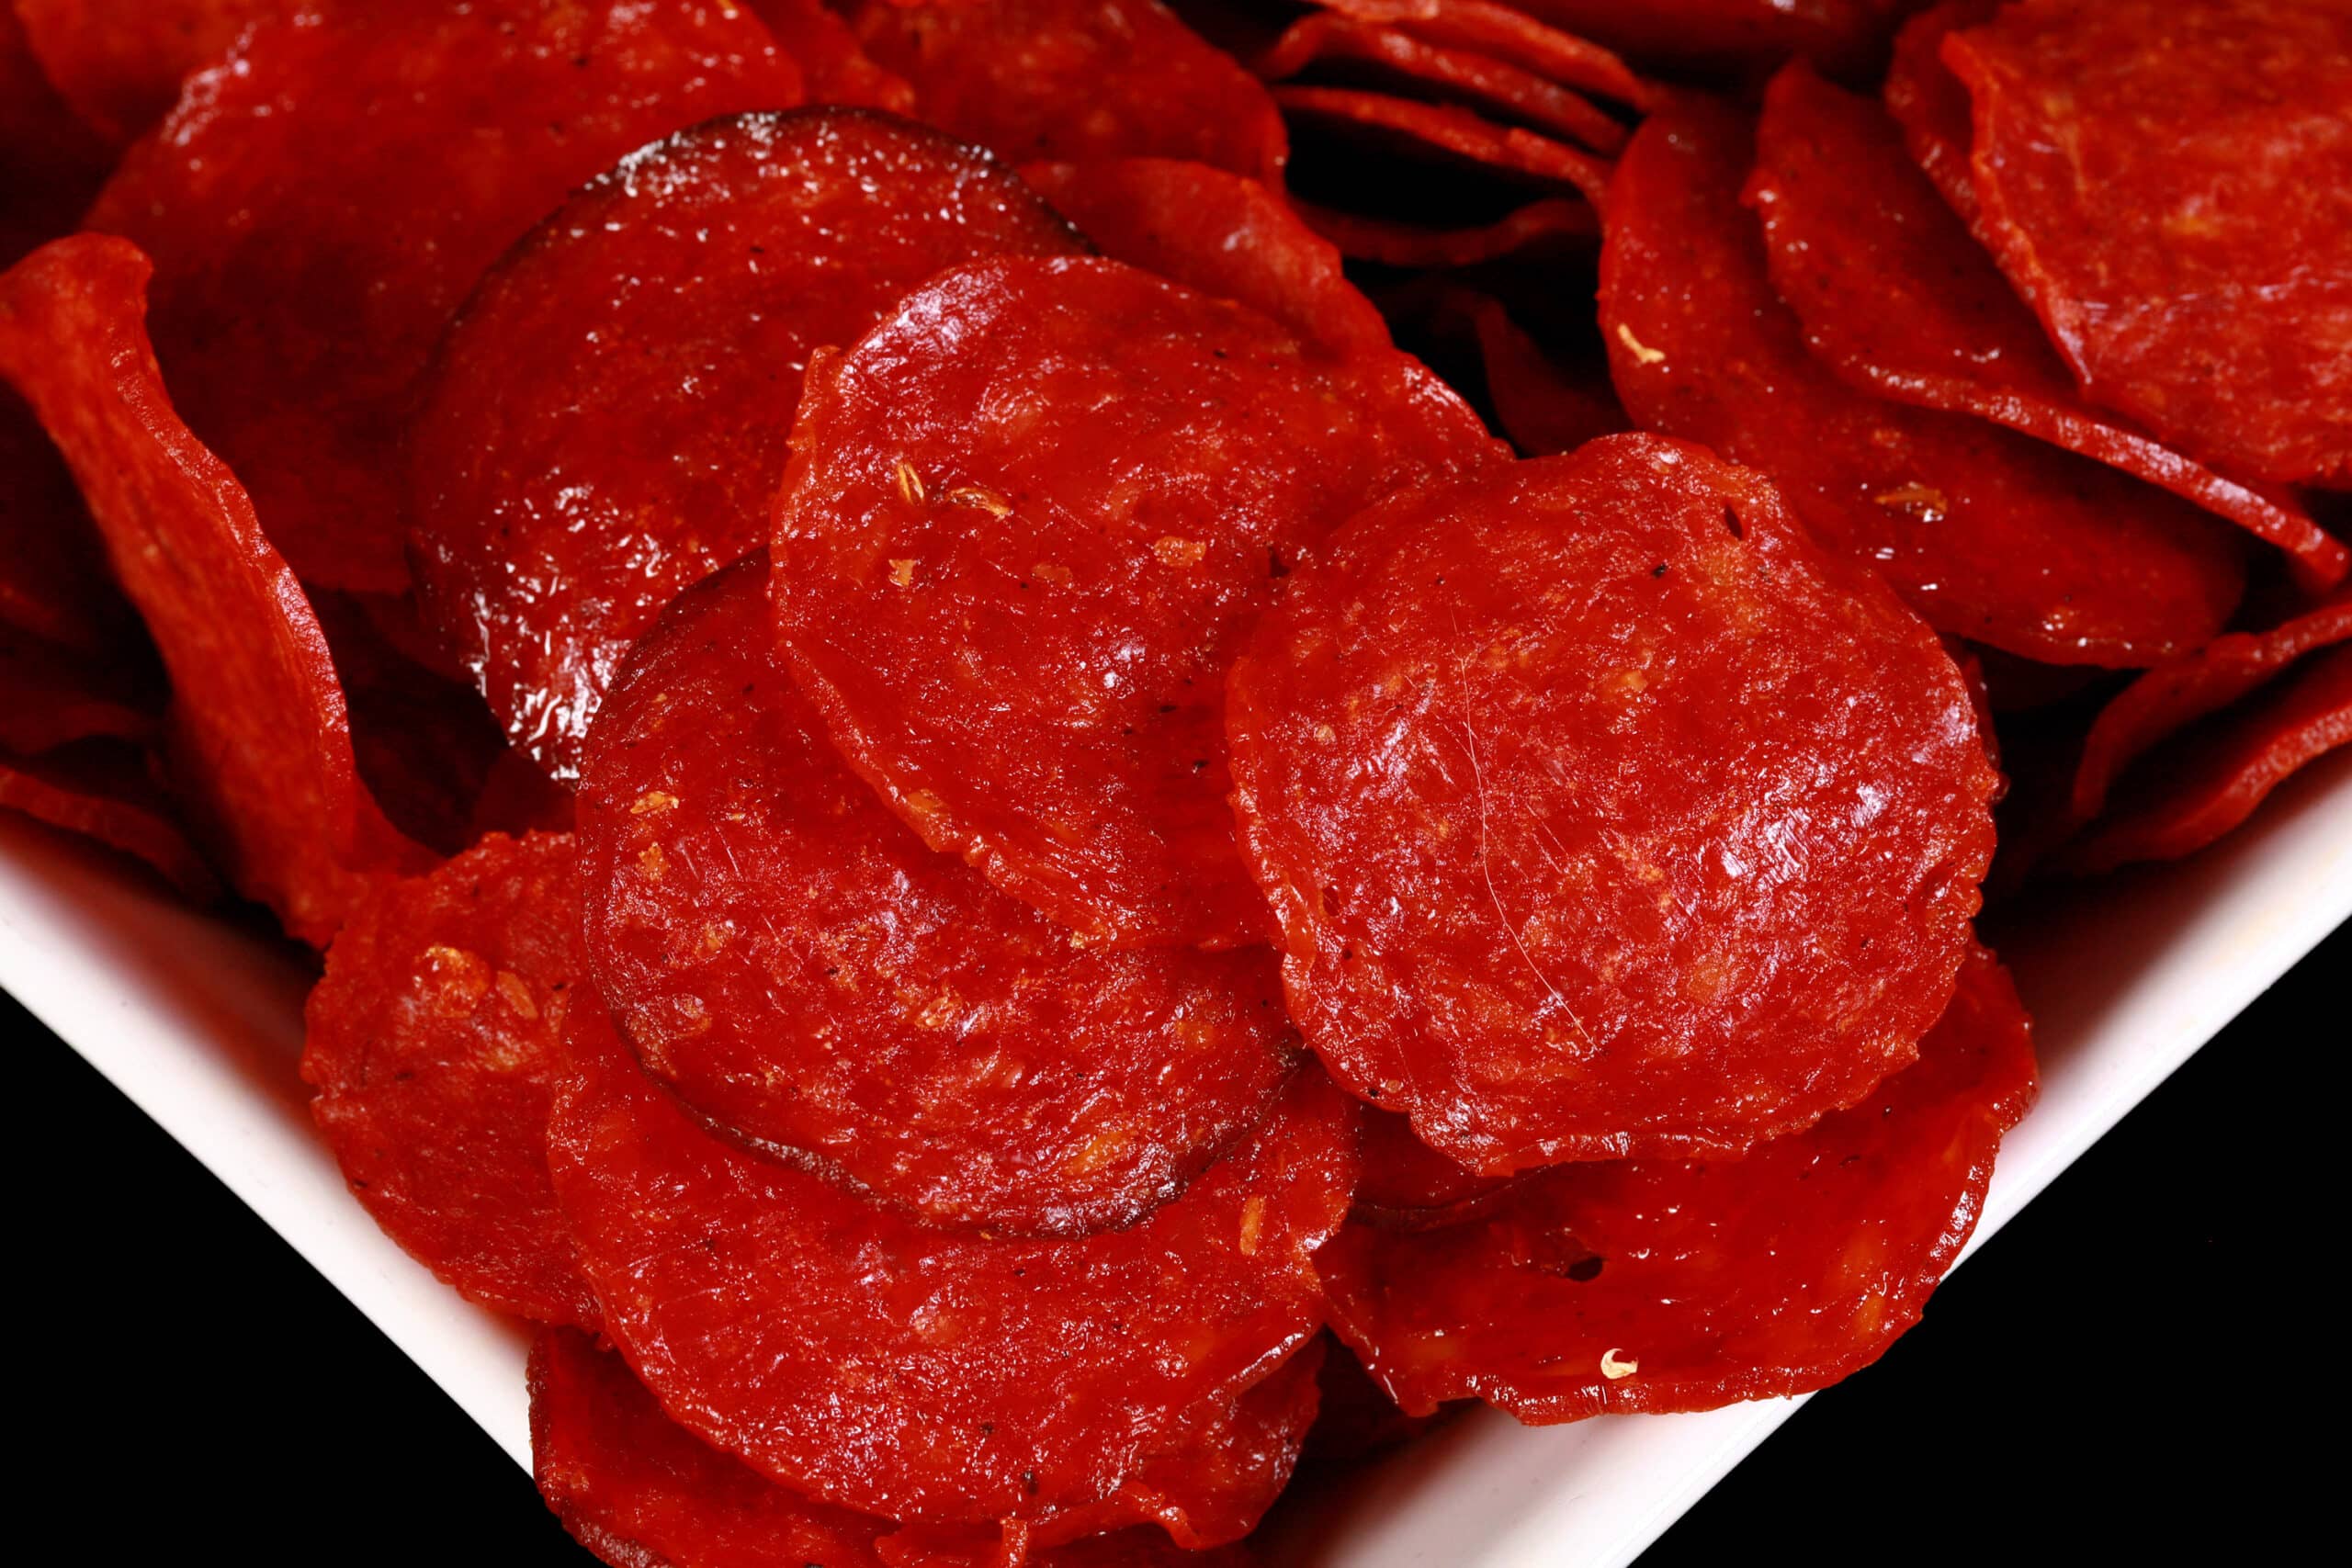 A bowl of dehydrated pepperoni slices.